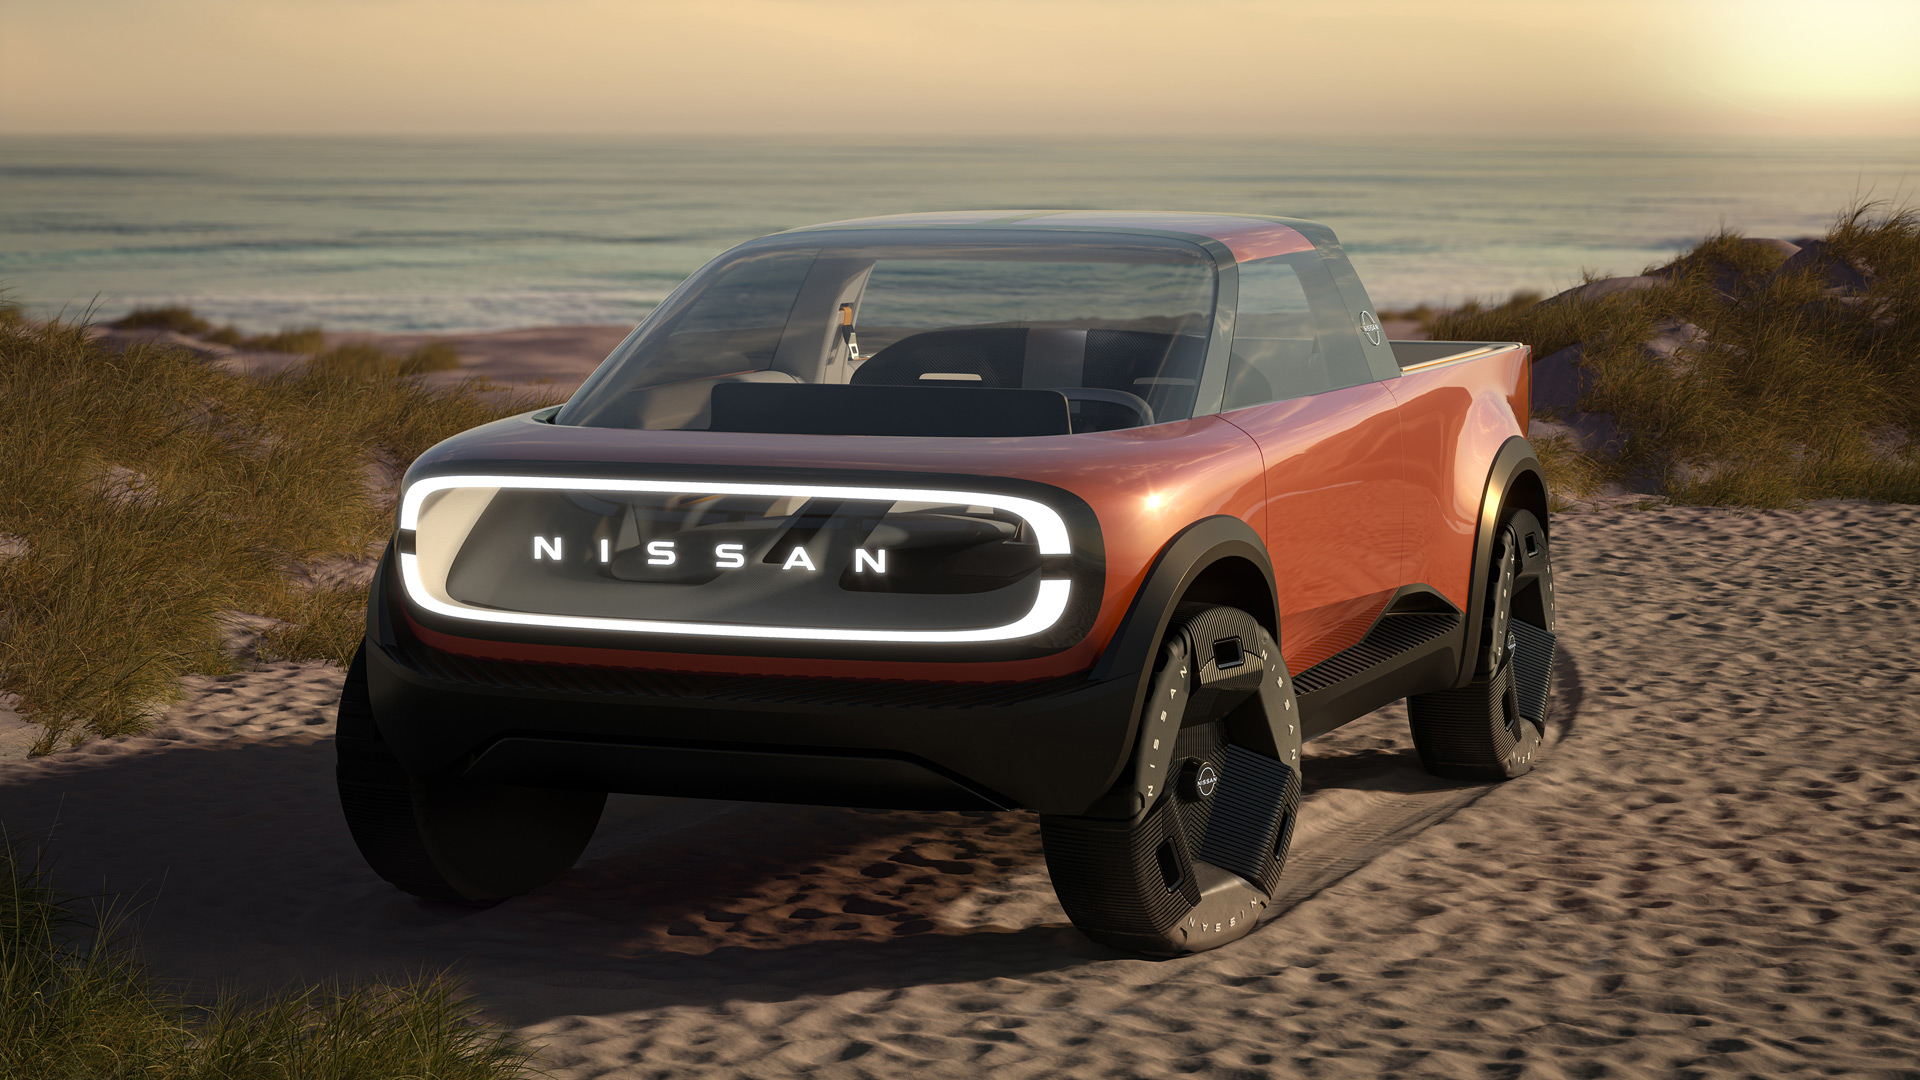 Nissan is reportedly studying an electric pickup truck for the US